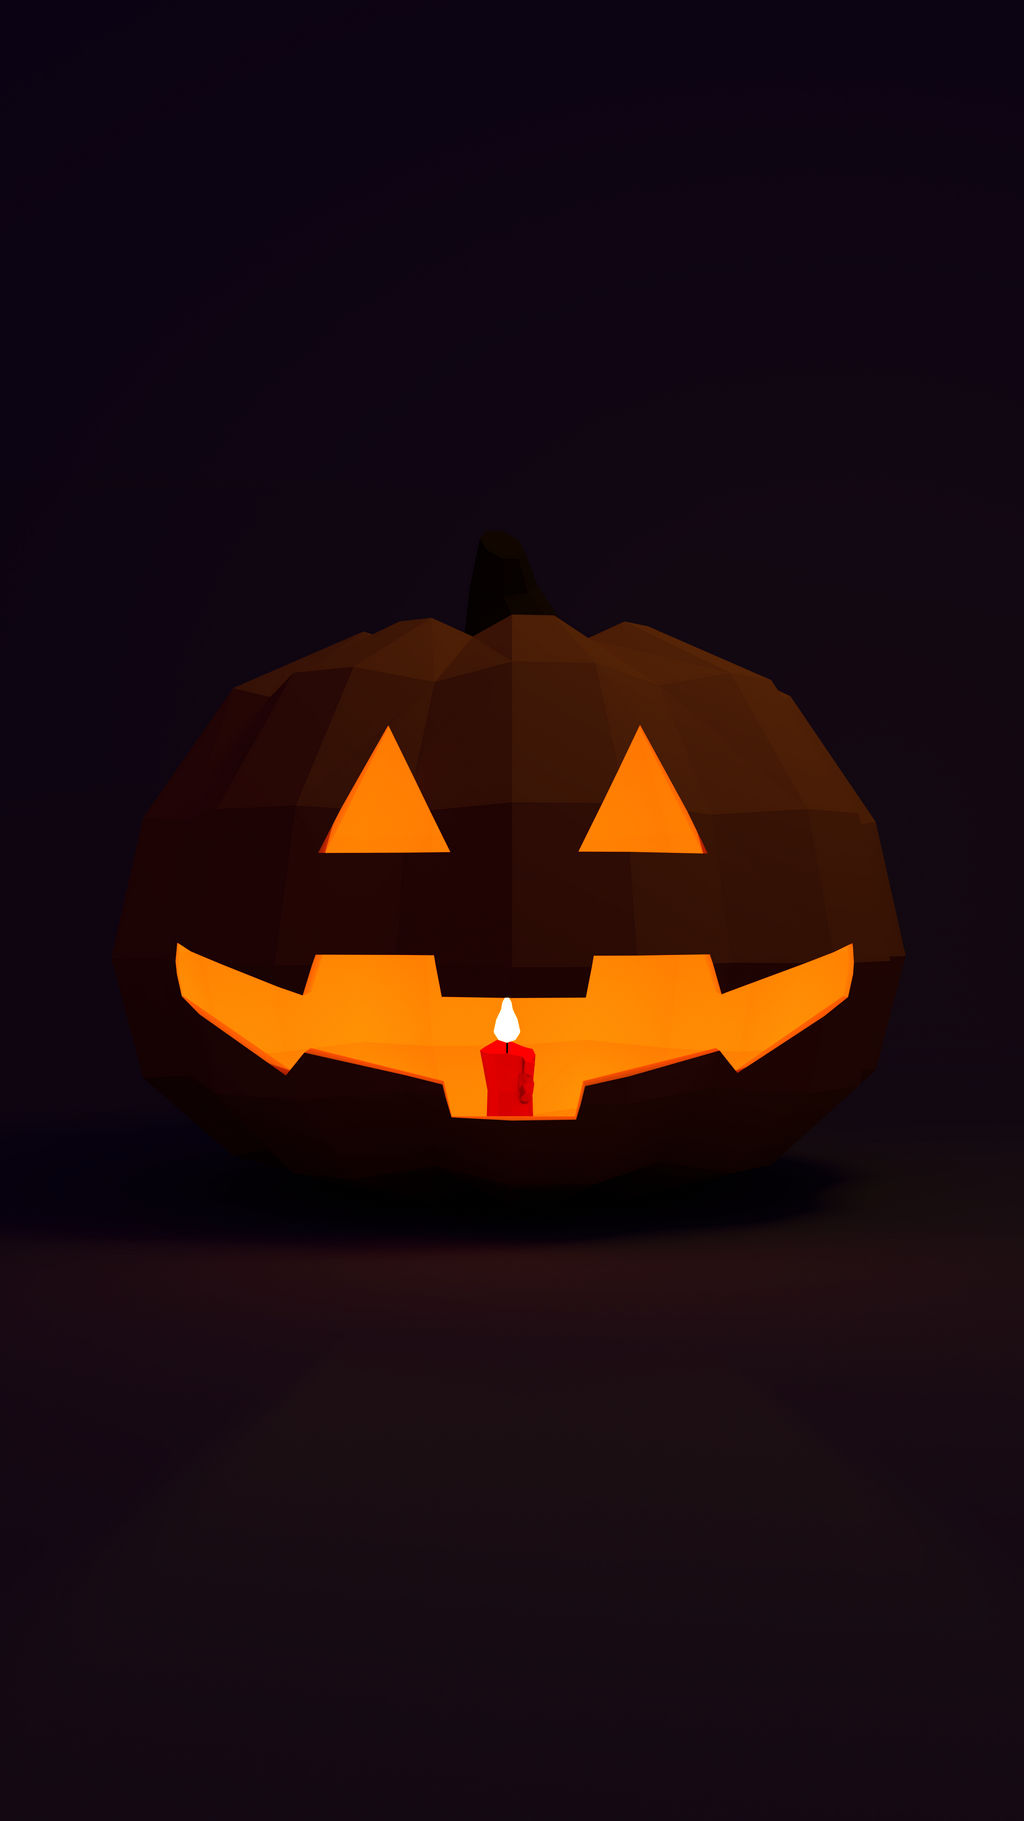 A Spooky Low Poly Pumpkin phone wallpaper by CaptainMangles on DeviantArt